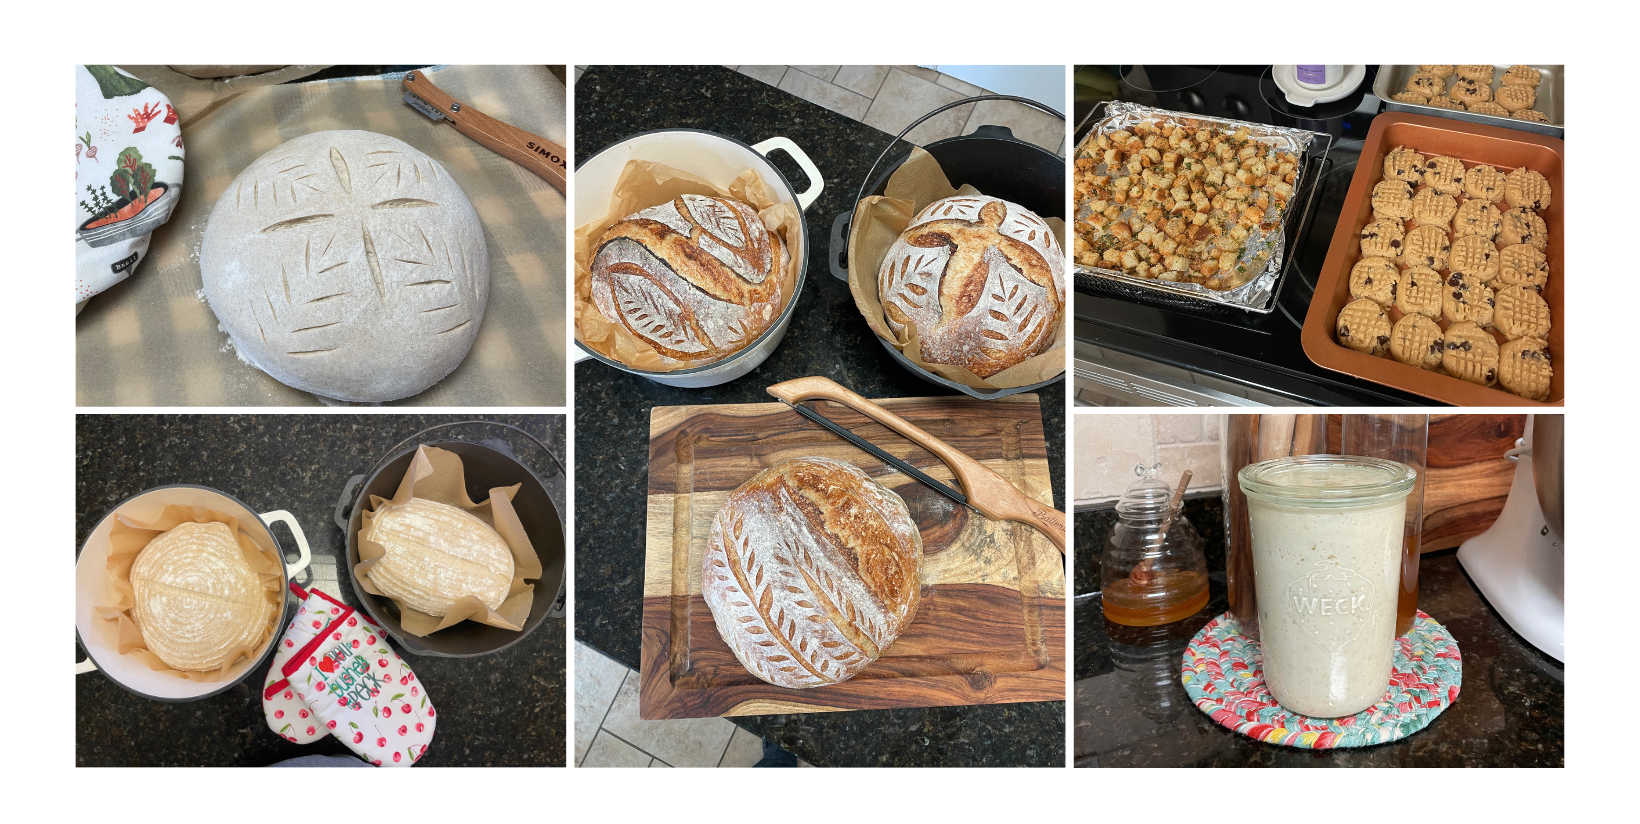 Did you know we offer Intro to Sourdough Classes?  Shop "Intro to Sourdough" for details and dates.